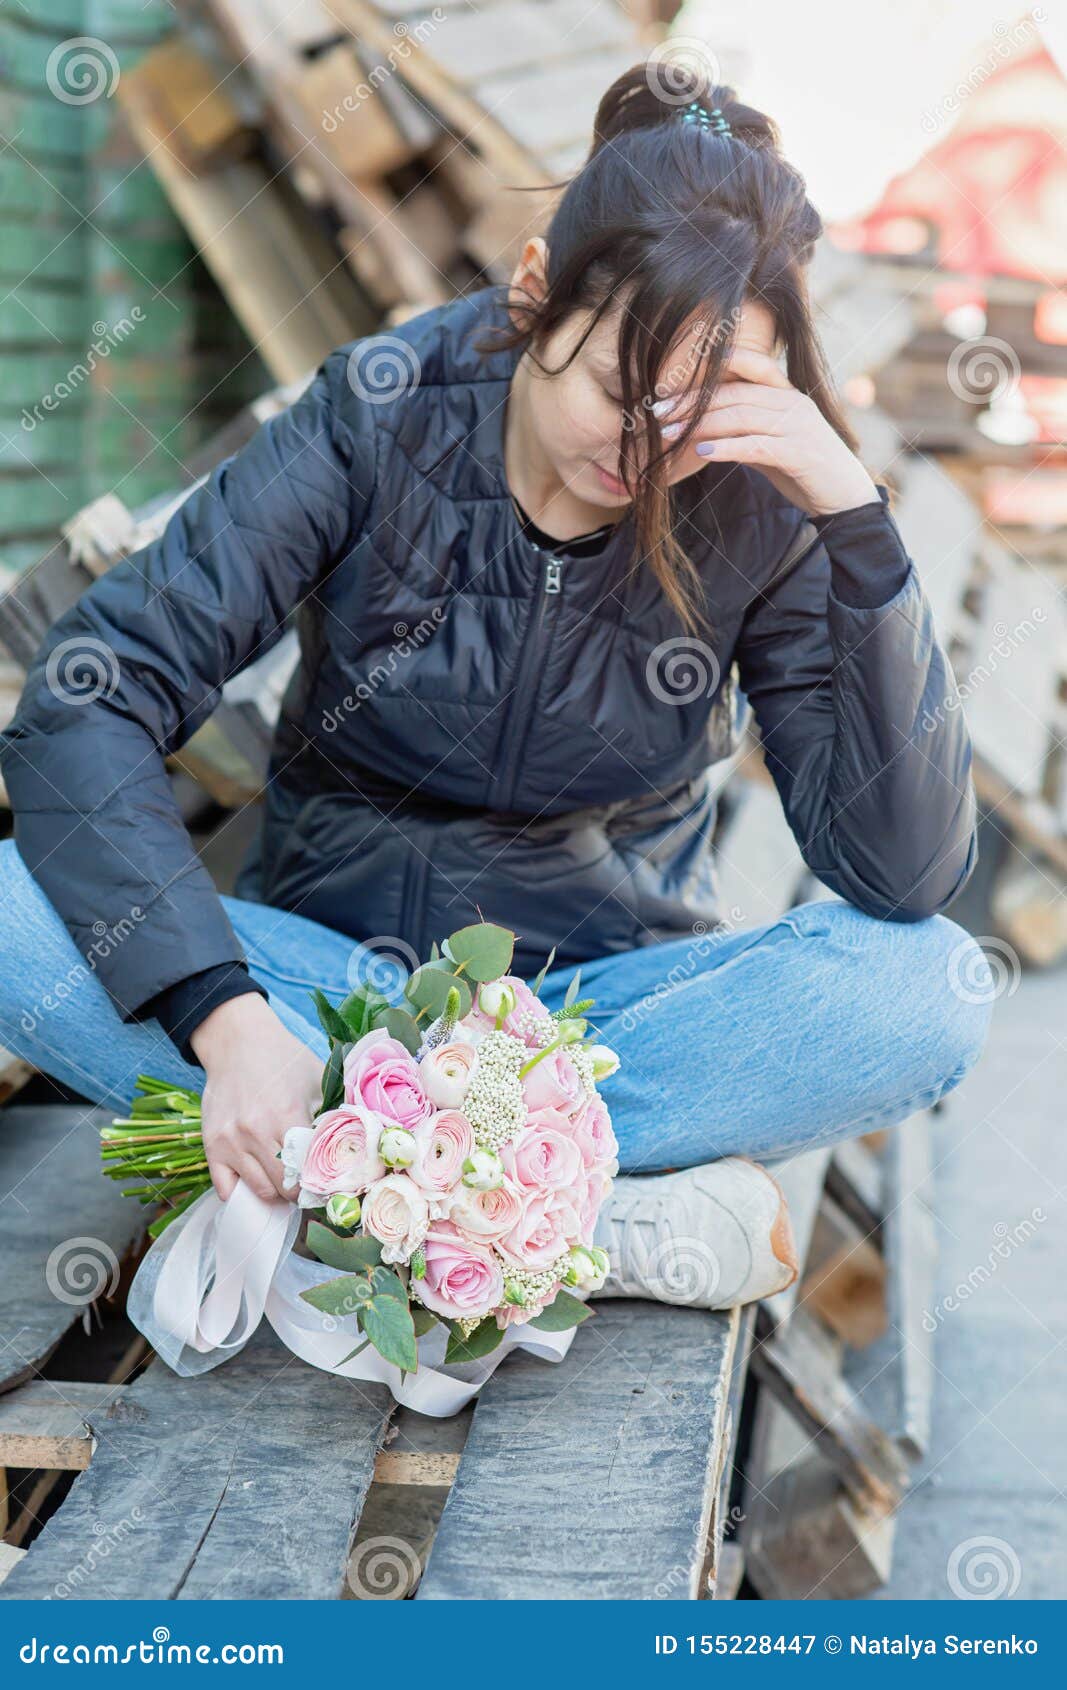 Sad Girl Sits on a Bench and Holds a Wedding Bouquet. Girl Crying ...